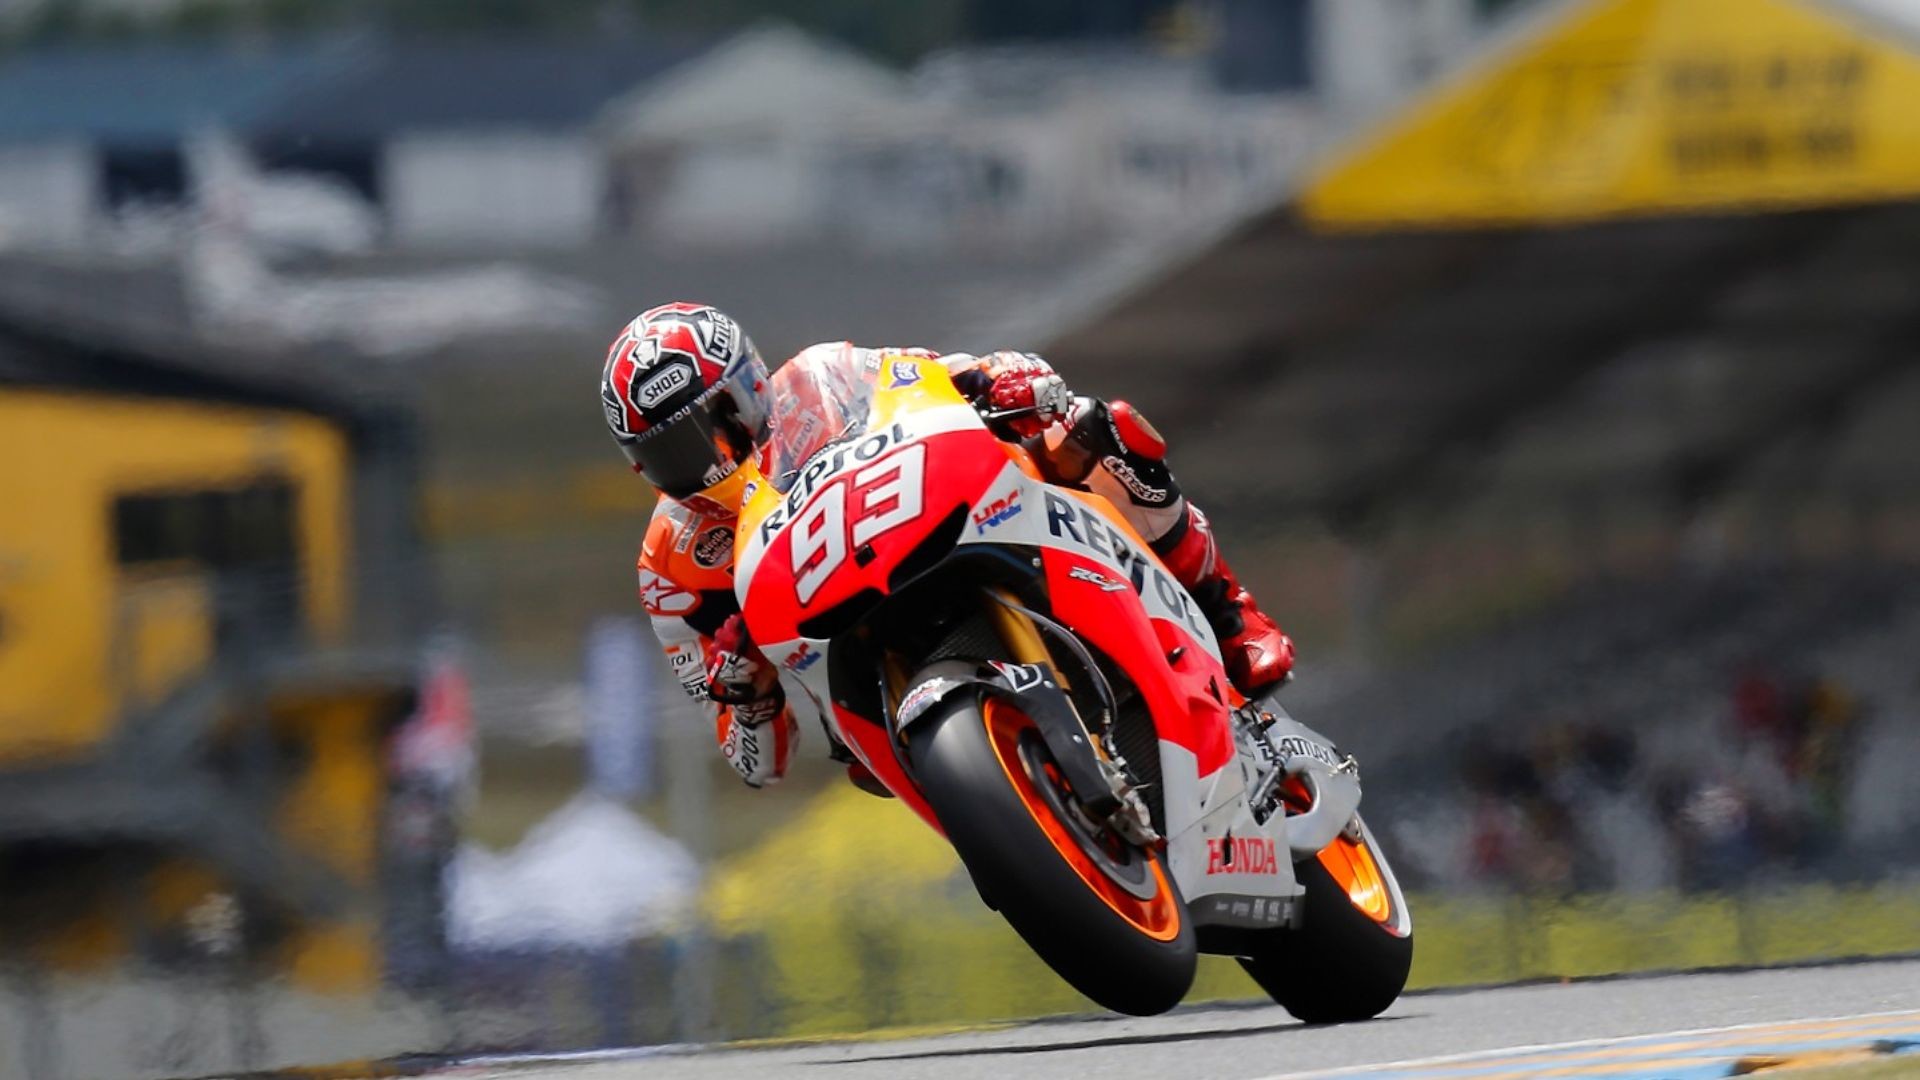 1920x1080 Search Results for “marc marquez ipad wallpaper” – Adorable Wallpapers